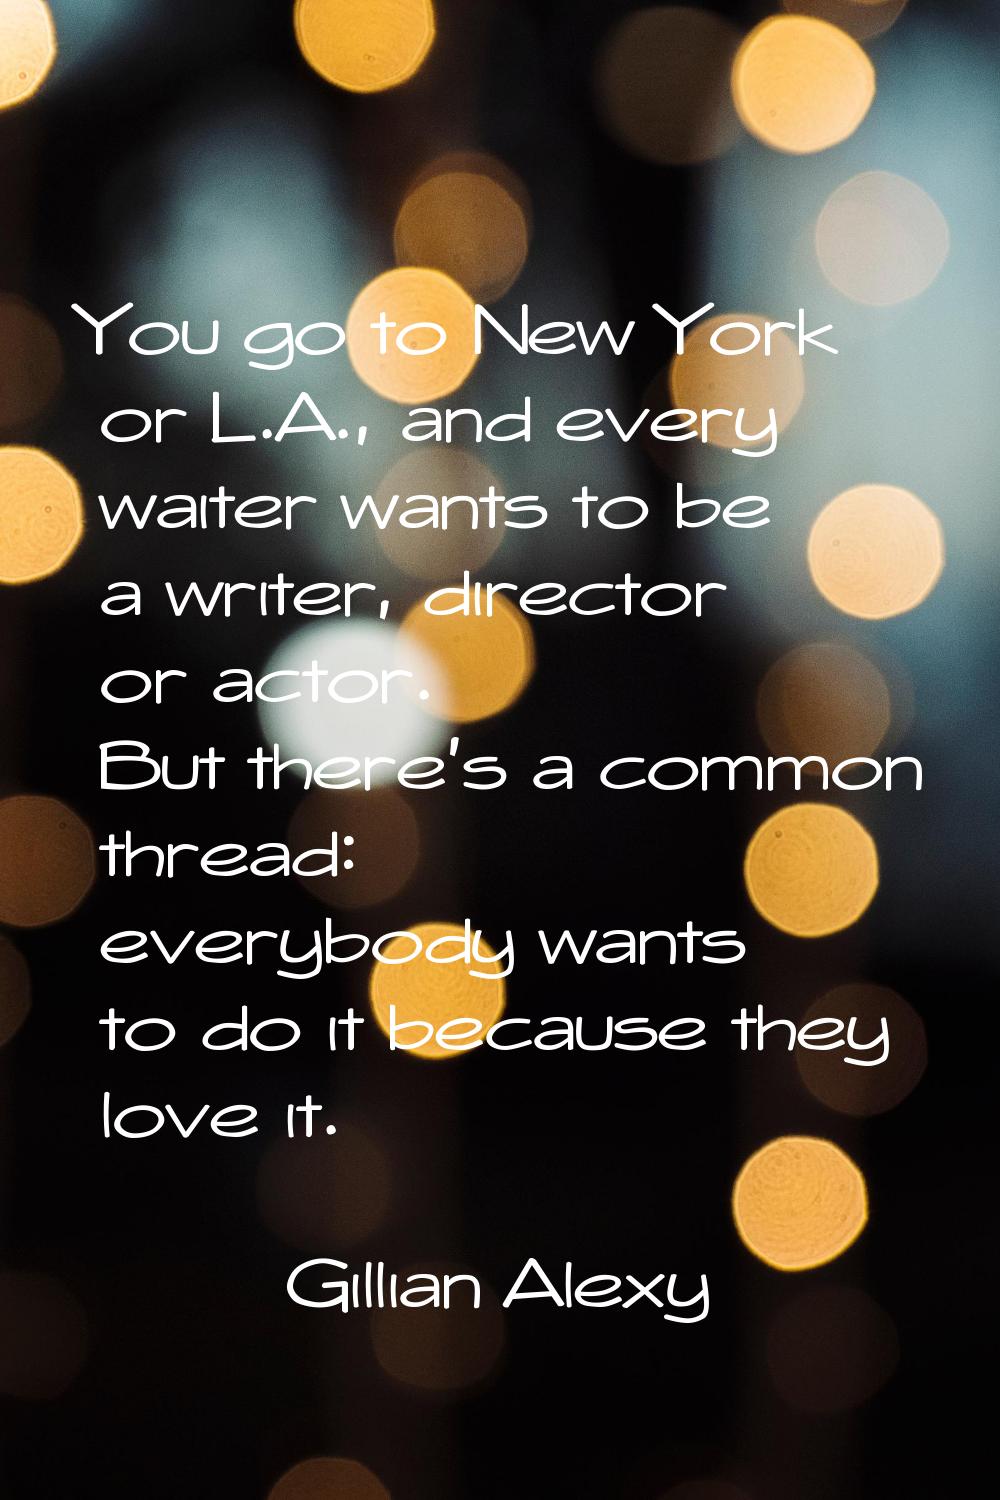 You go to New York or L.A., and every waiter wants to be a writer, director or actor. But there's a